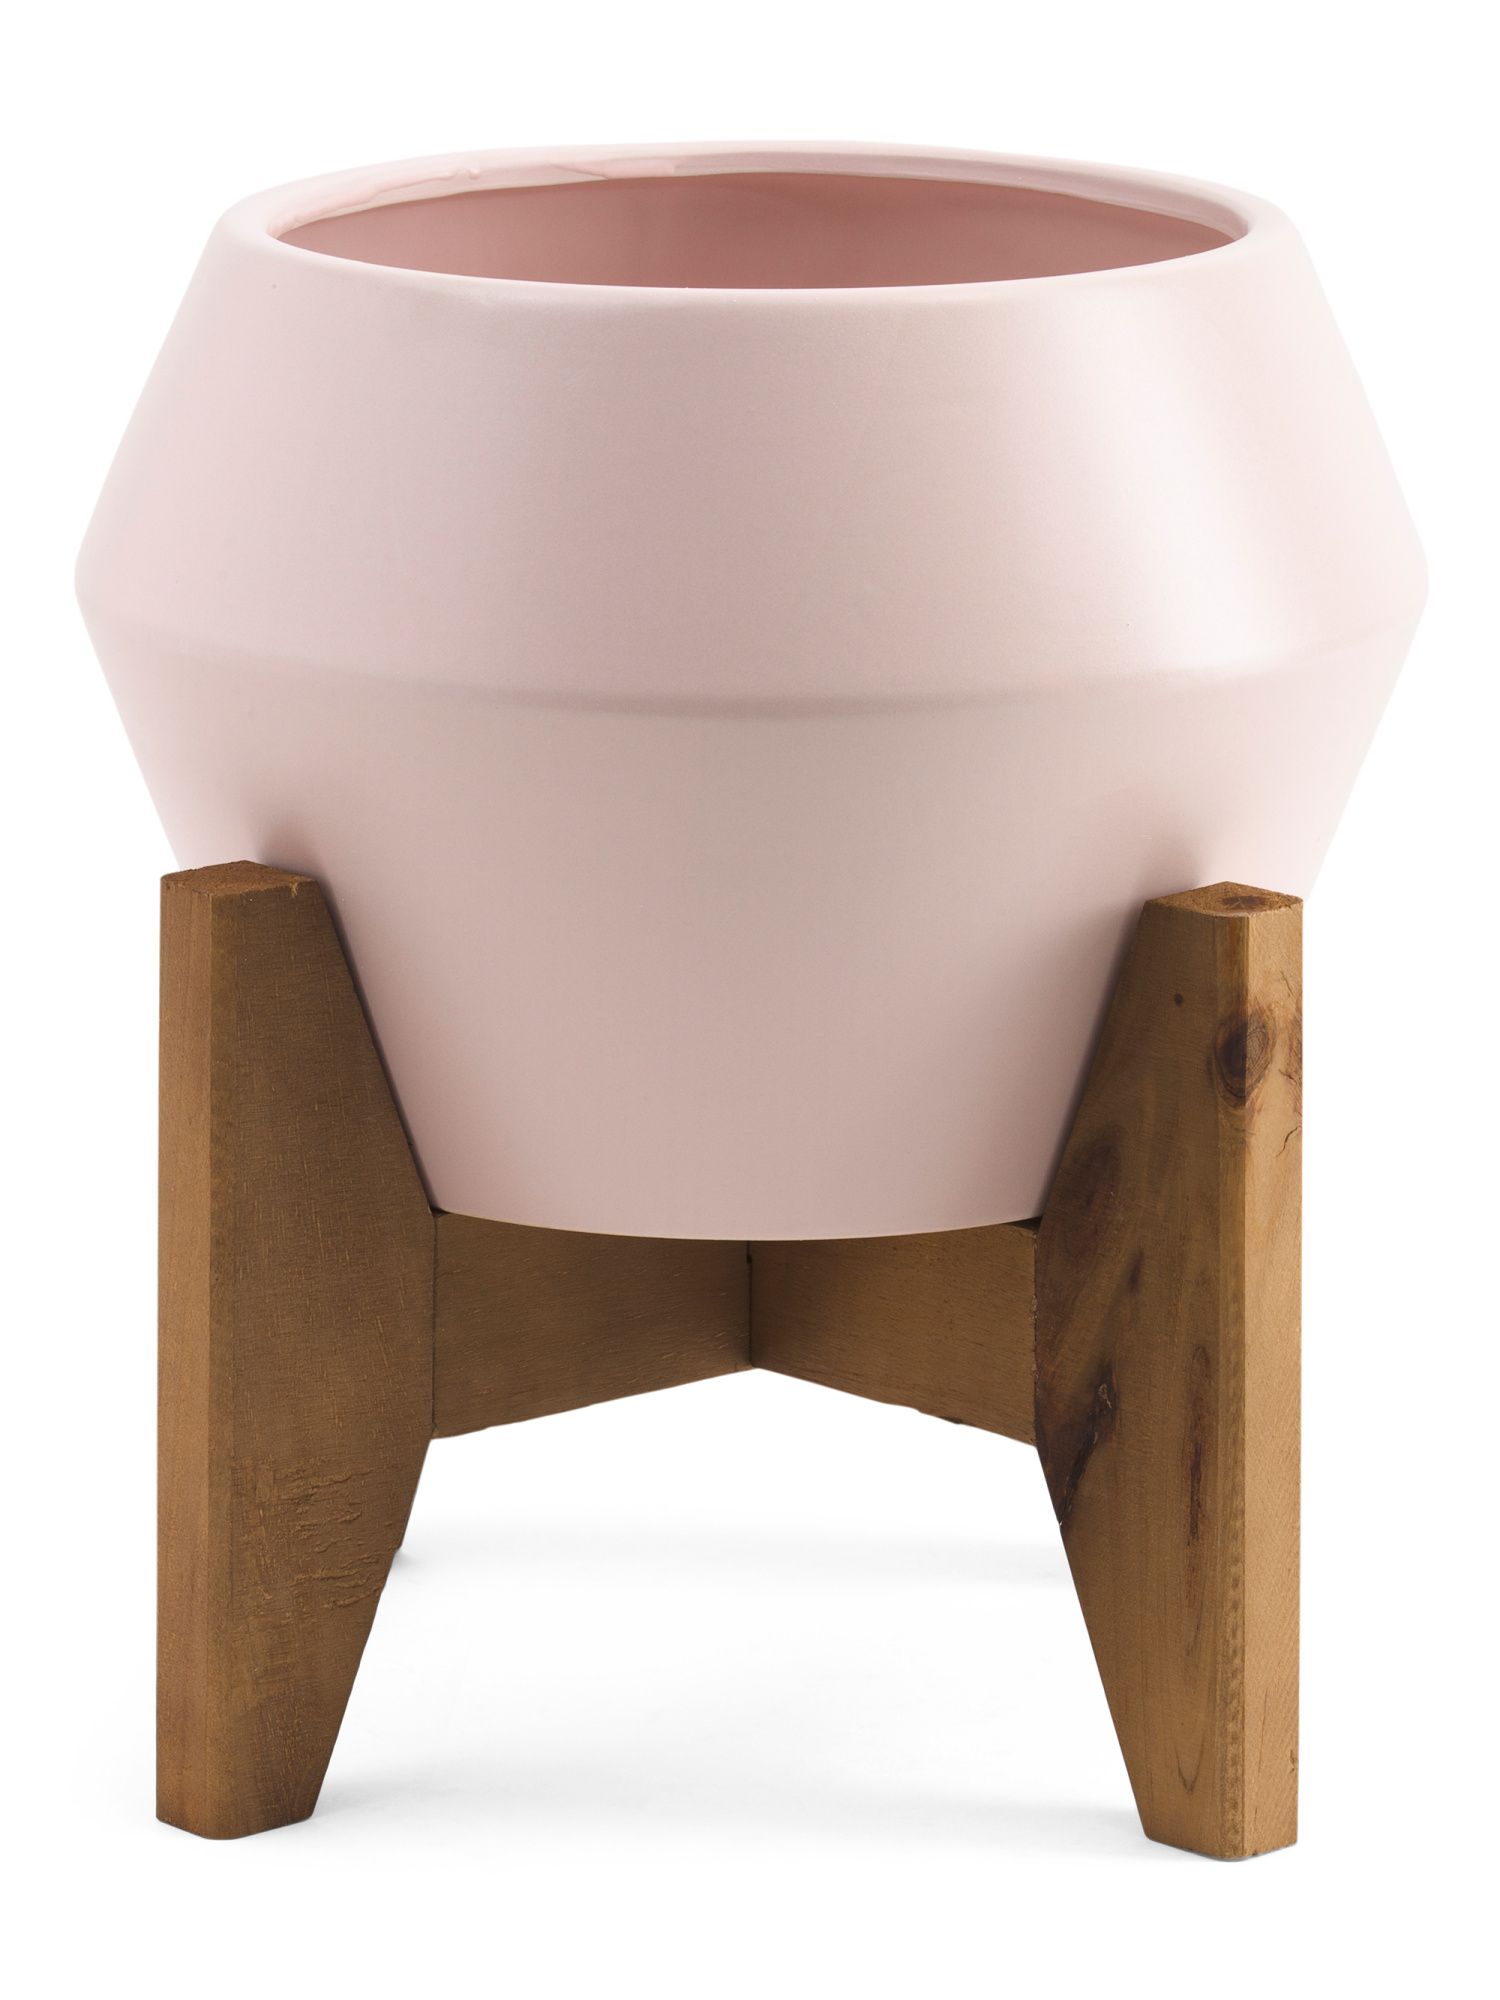 10in Ceramic Planter On Wood Stand | TJ Maxx